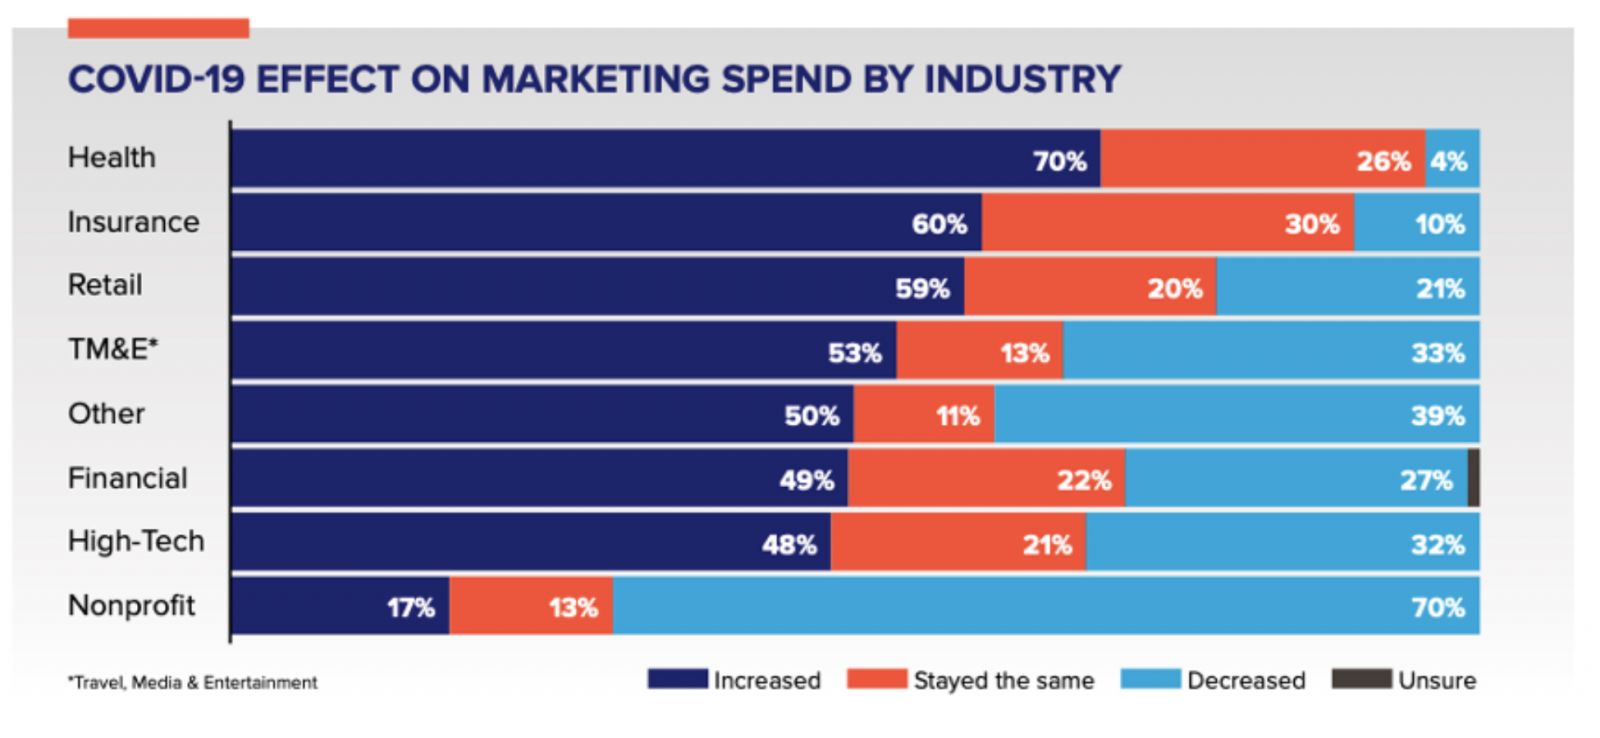 COVID-19 effect on marketing spend by industry infographic